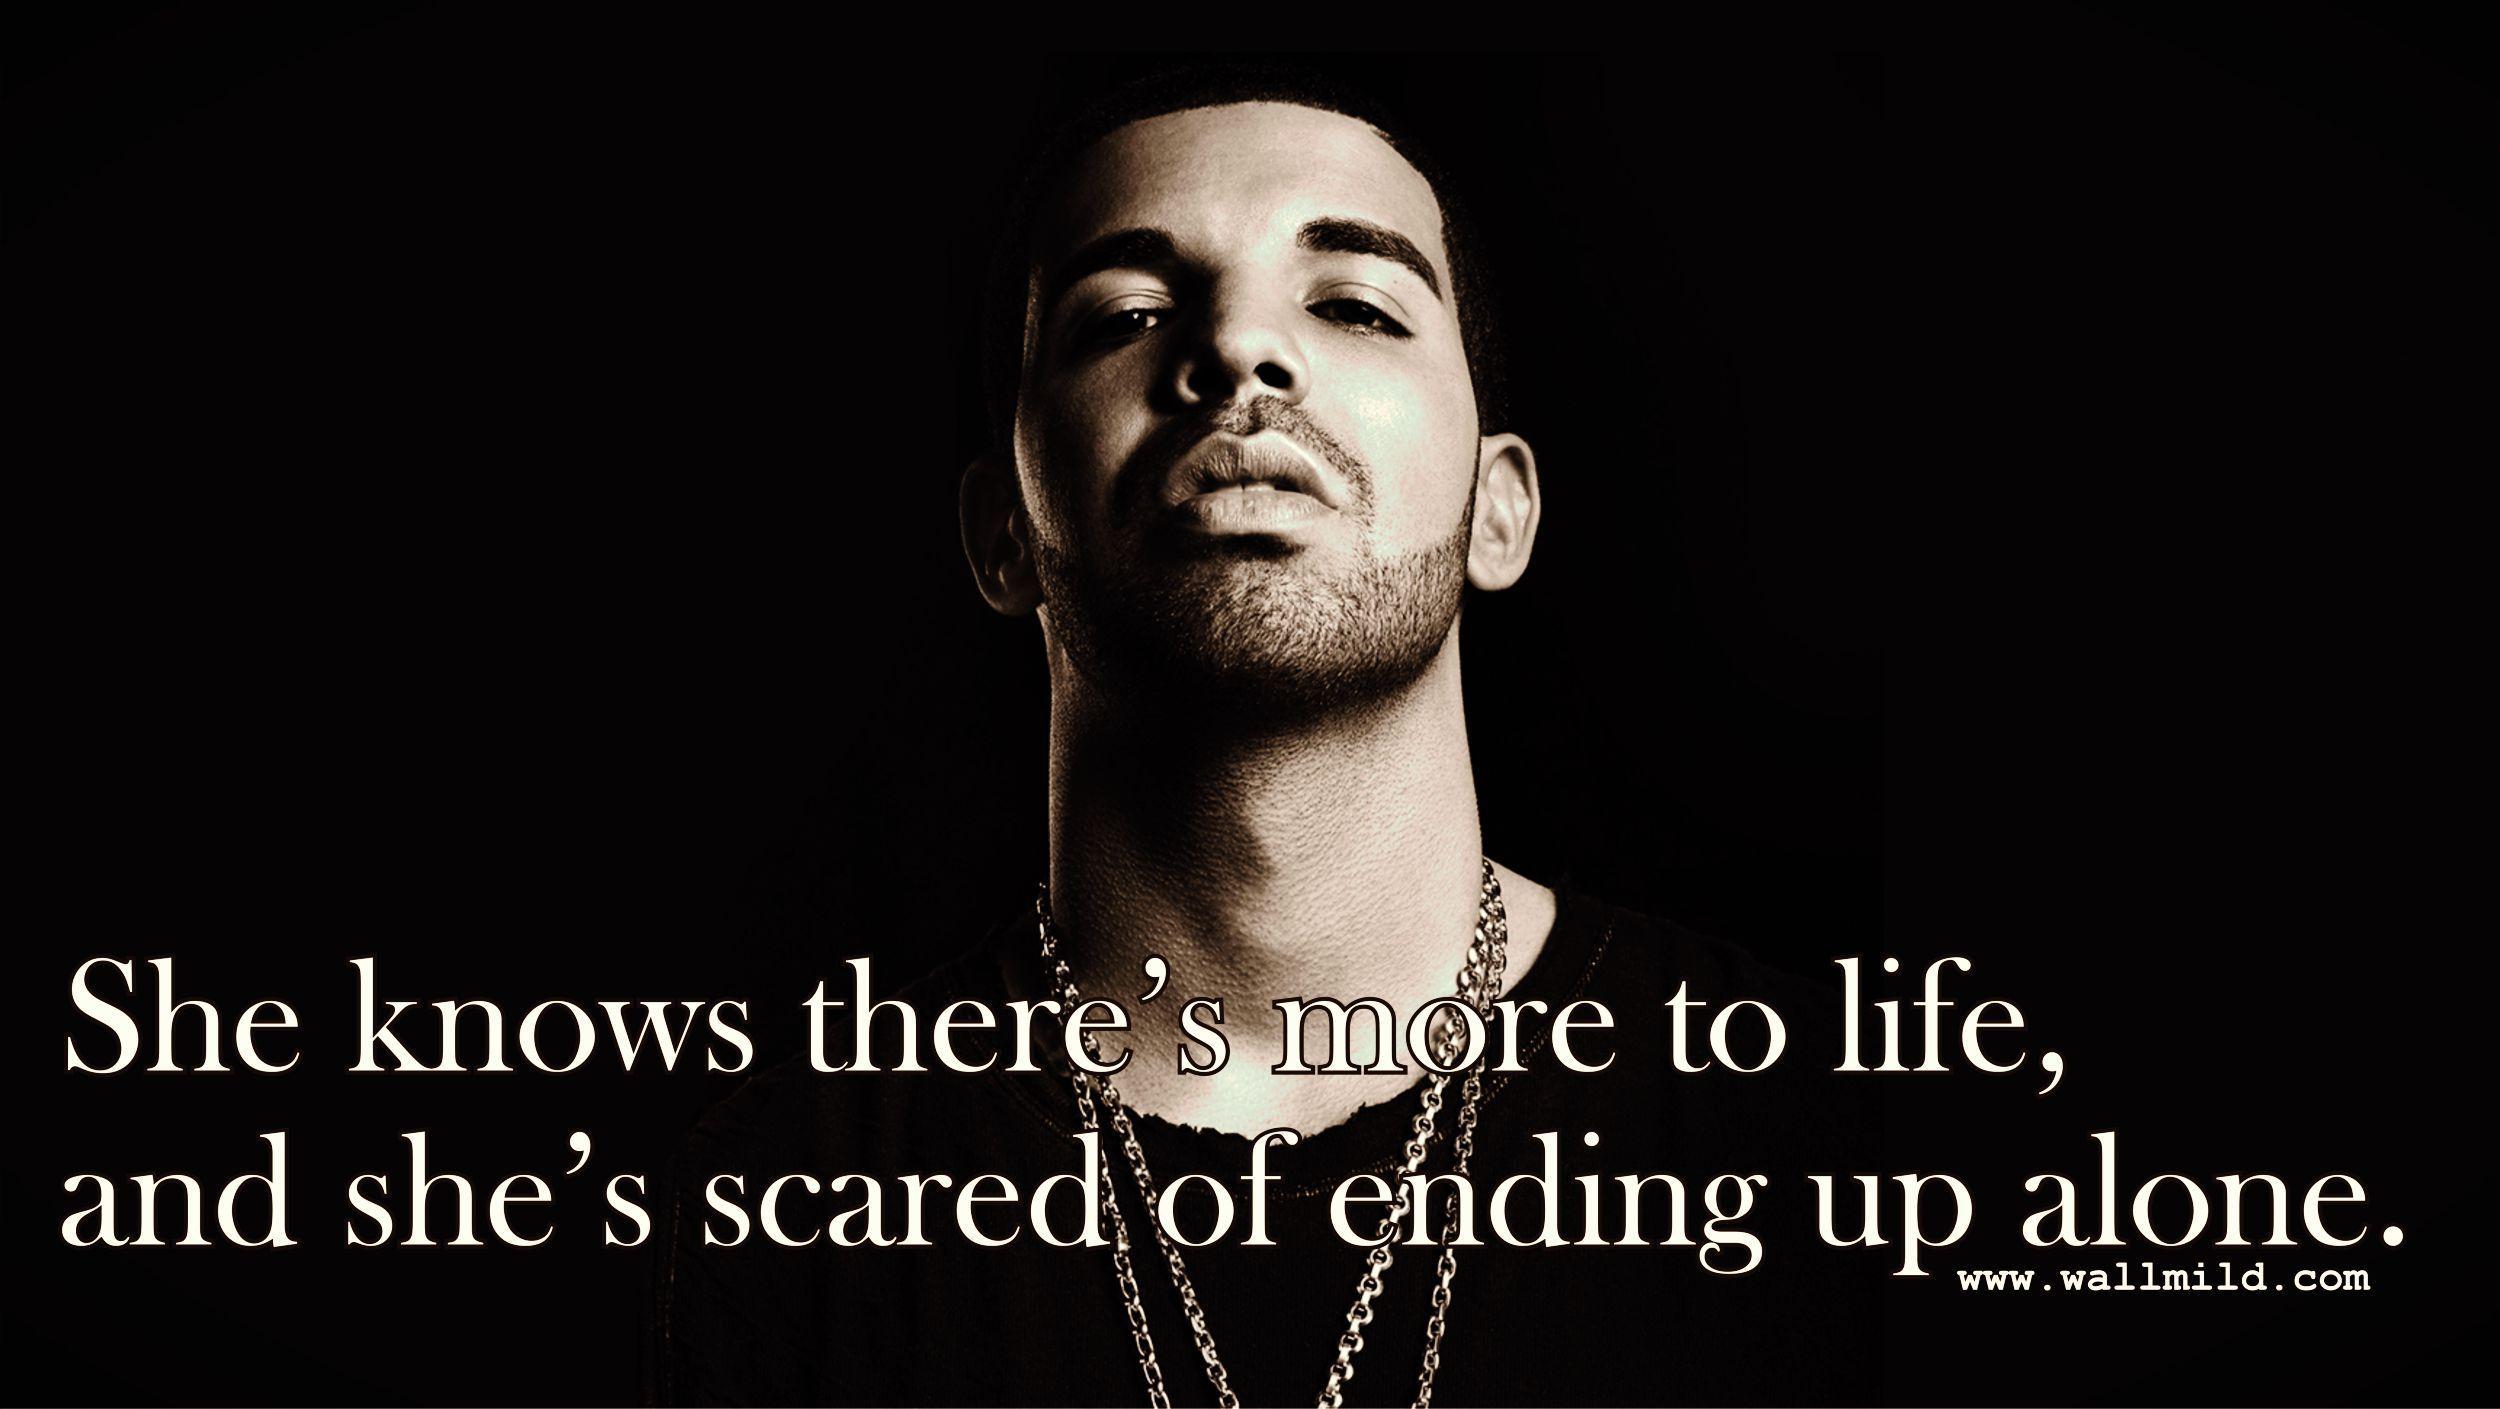 Drake Quote Wallpapers - Top Free Drake Quote Backgrounds - WallpaperAccess